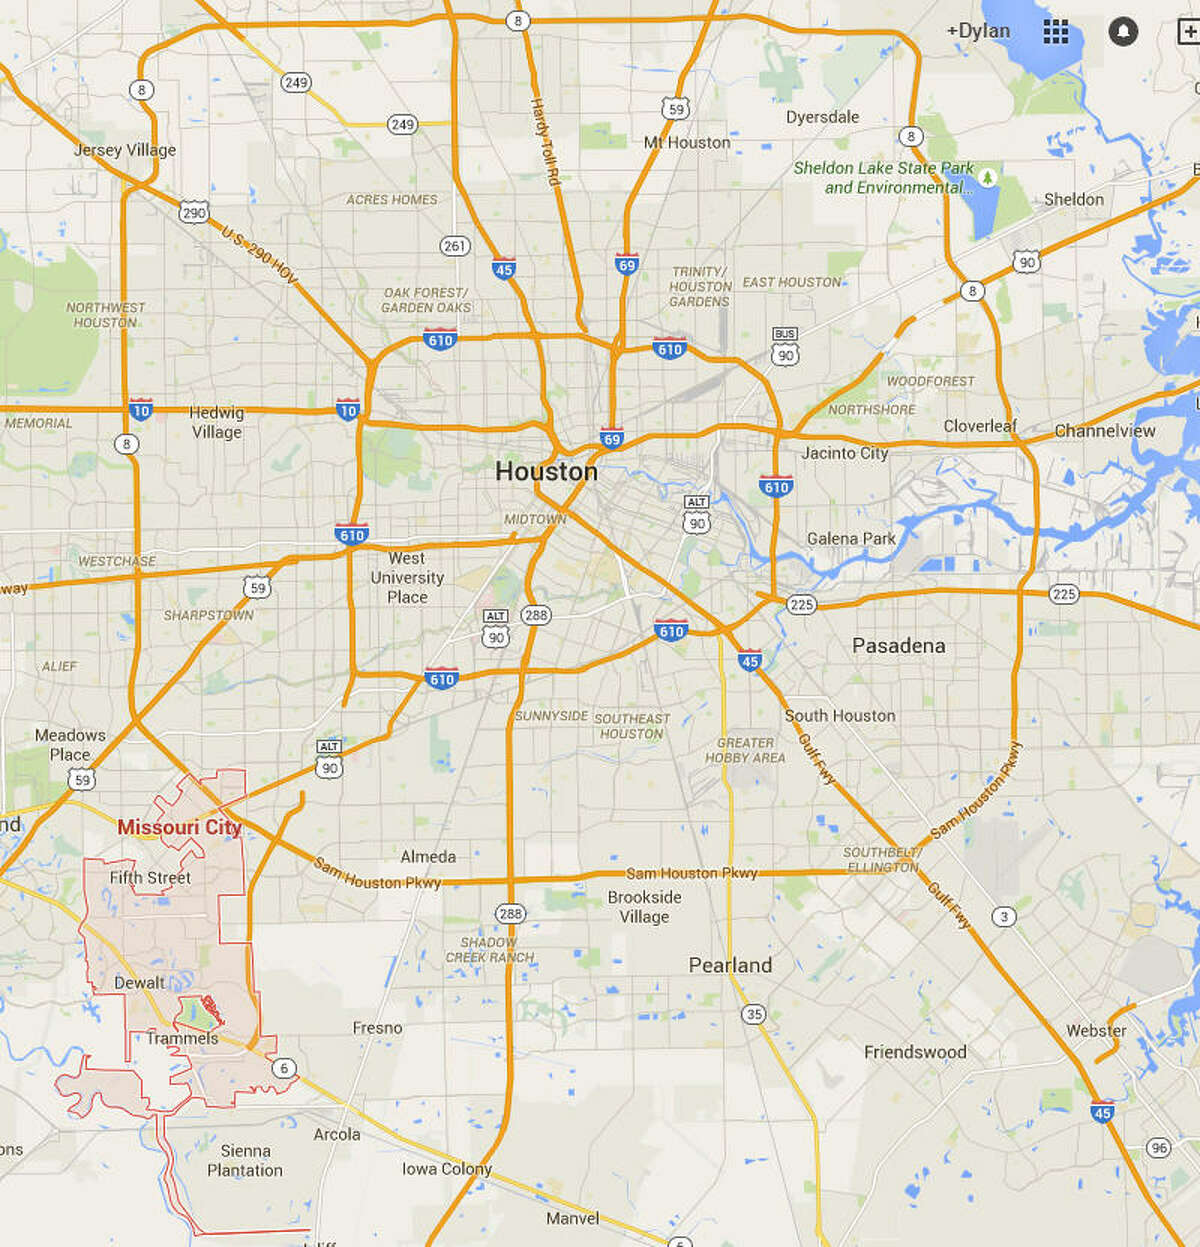 The fastest-growing cities around Houston